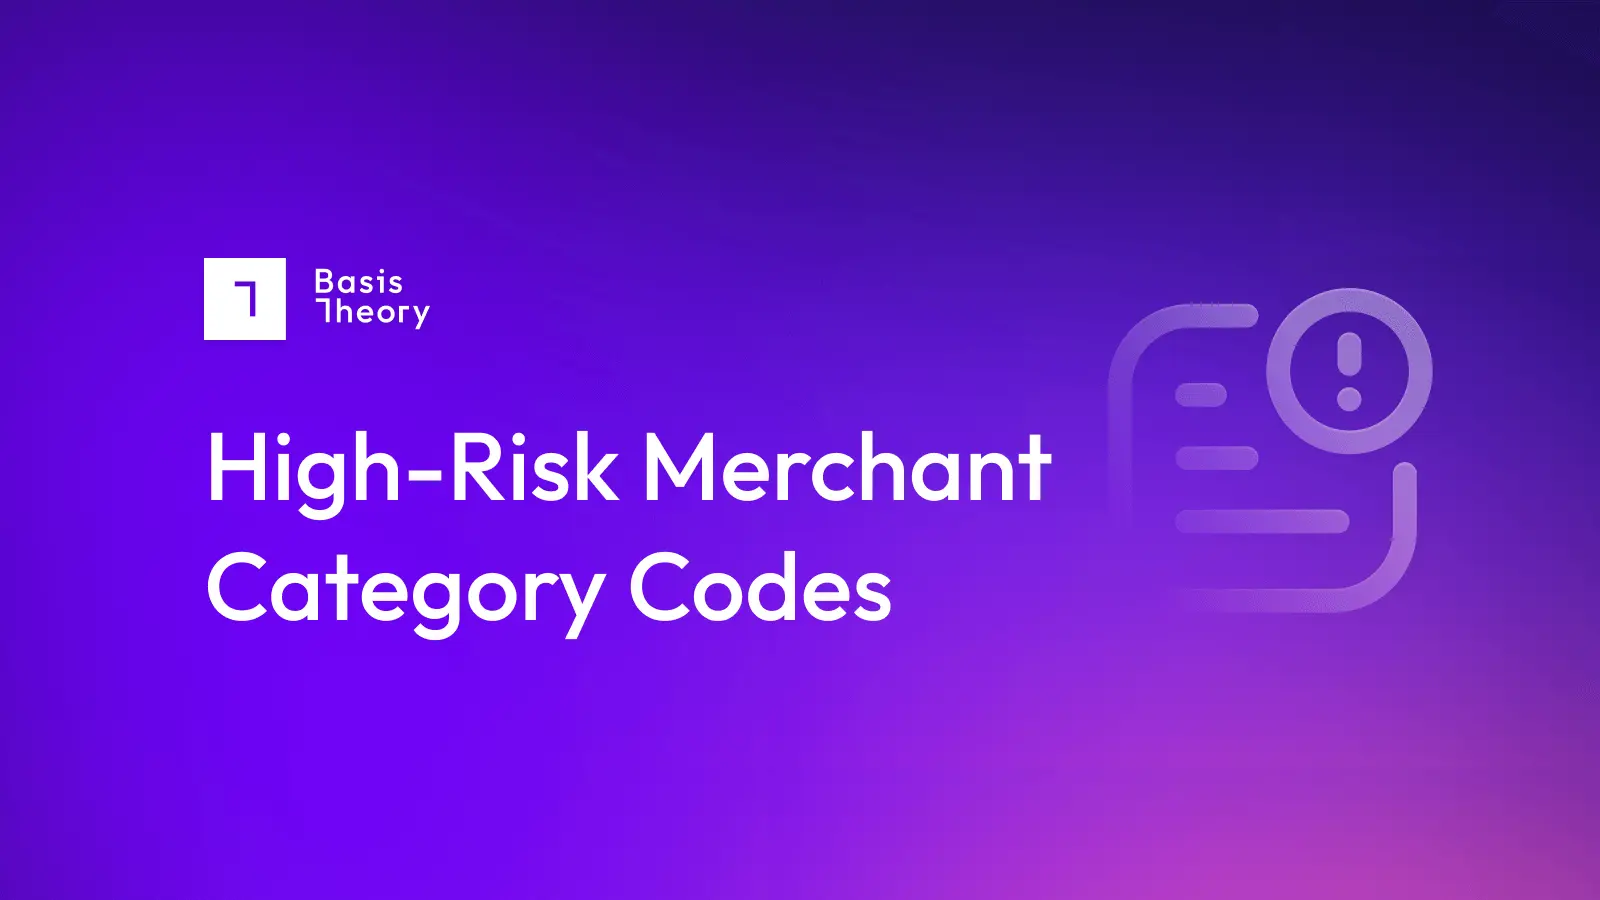 High-risk Merchant Category Codes